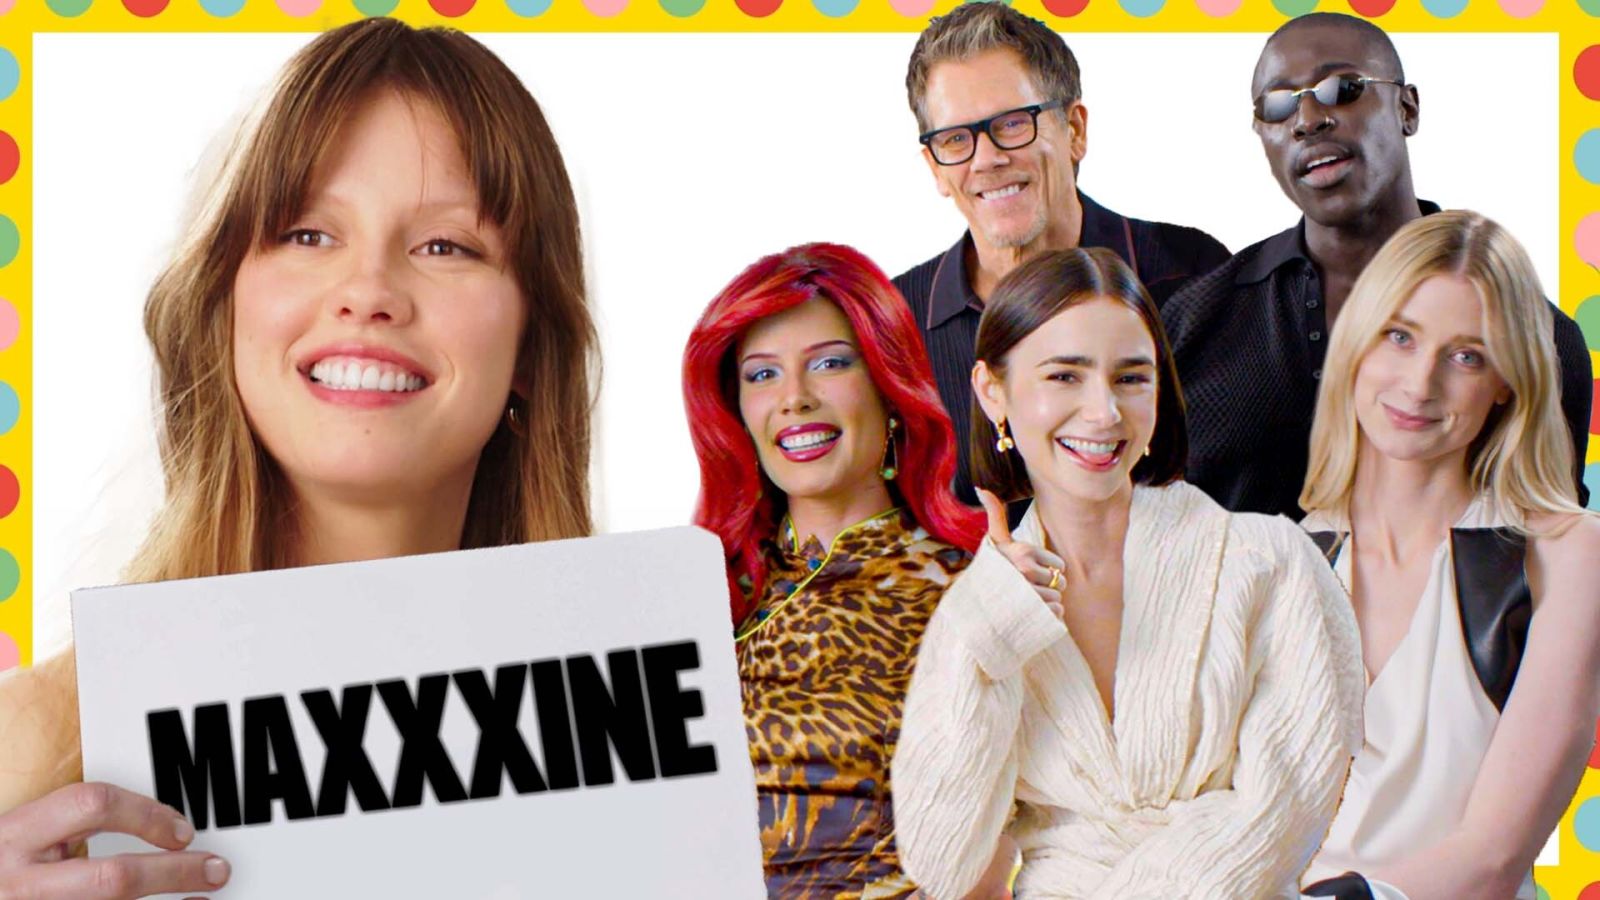 'MaXXXine' Cast Test How Well They Know Each Other